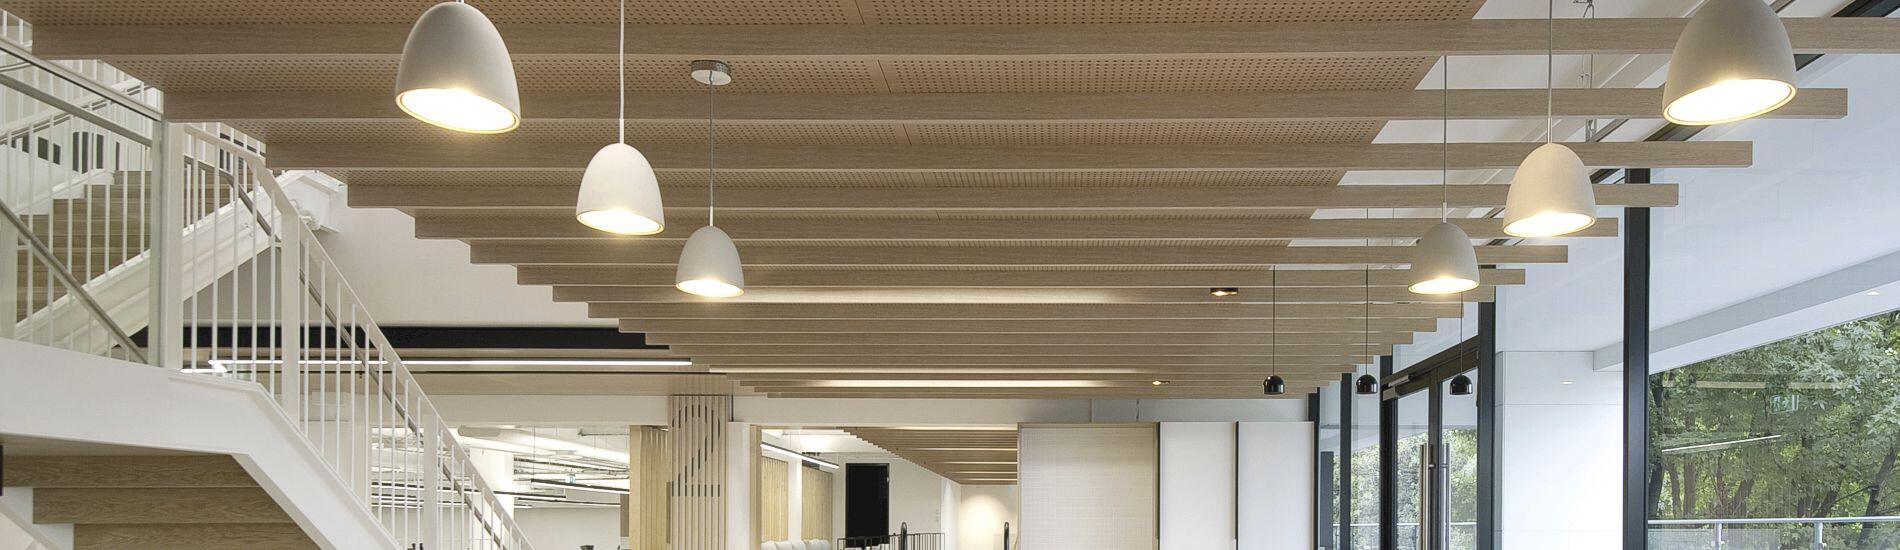 SUPACOUSTIC Perforated Panels Combined With SUPASLAT Slats Provide Economical Acoustic Solution For Workplace